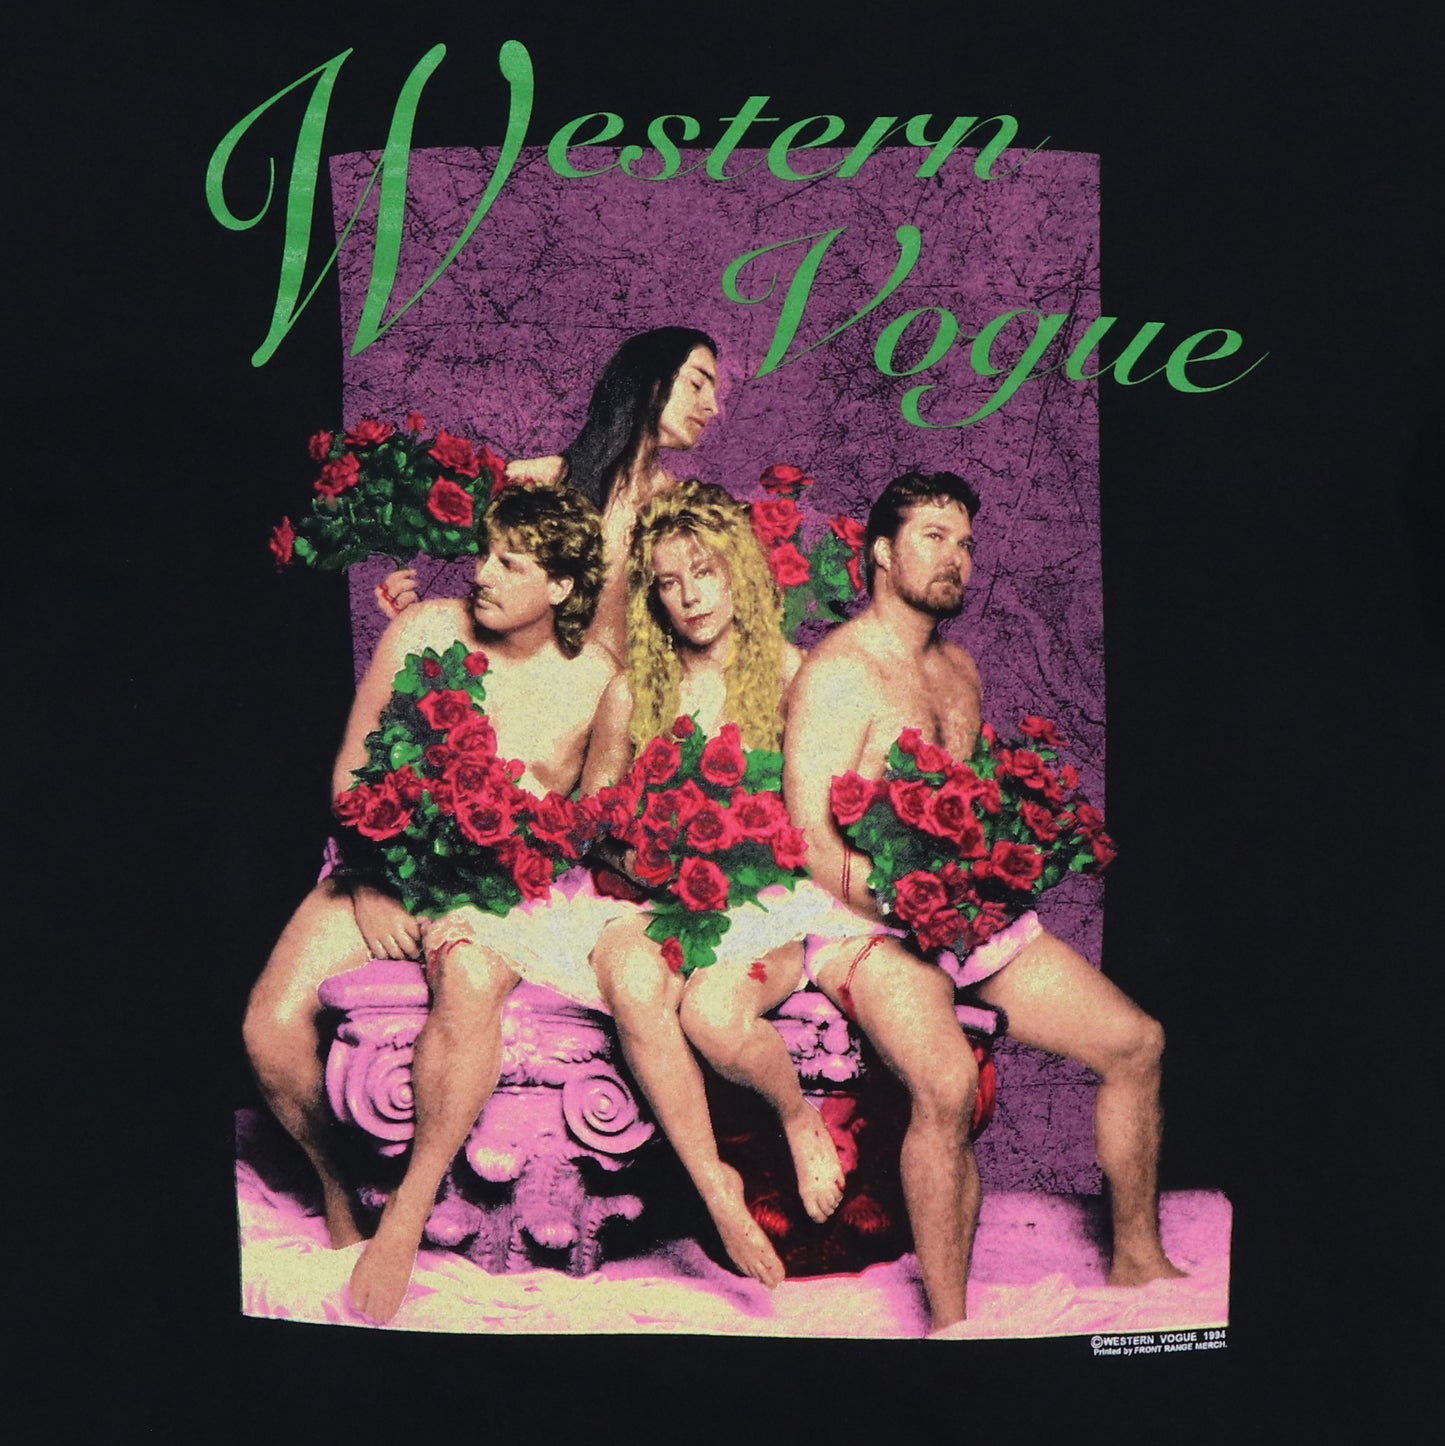 1994 Western Vogue Any Place Tour Shirt